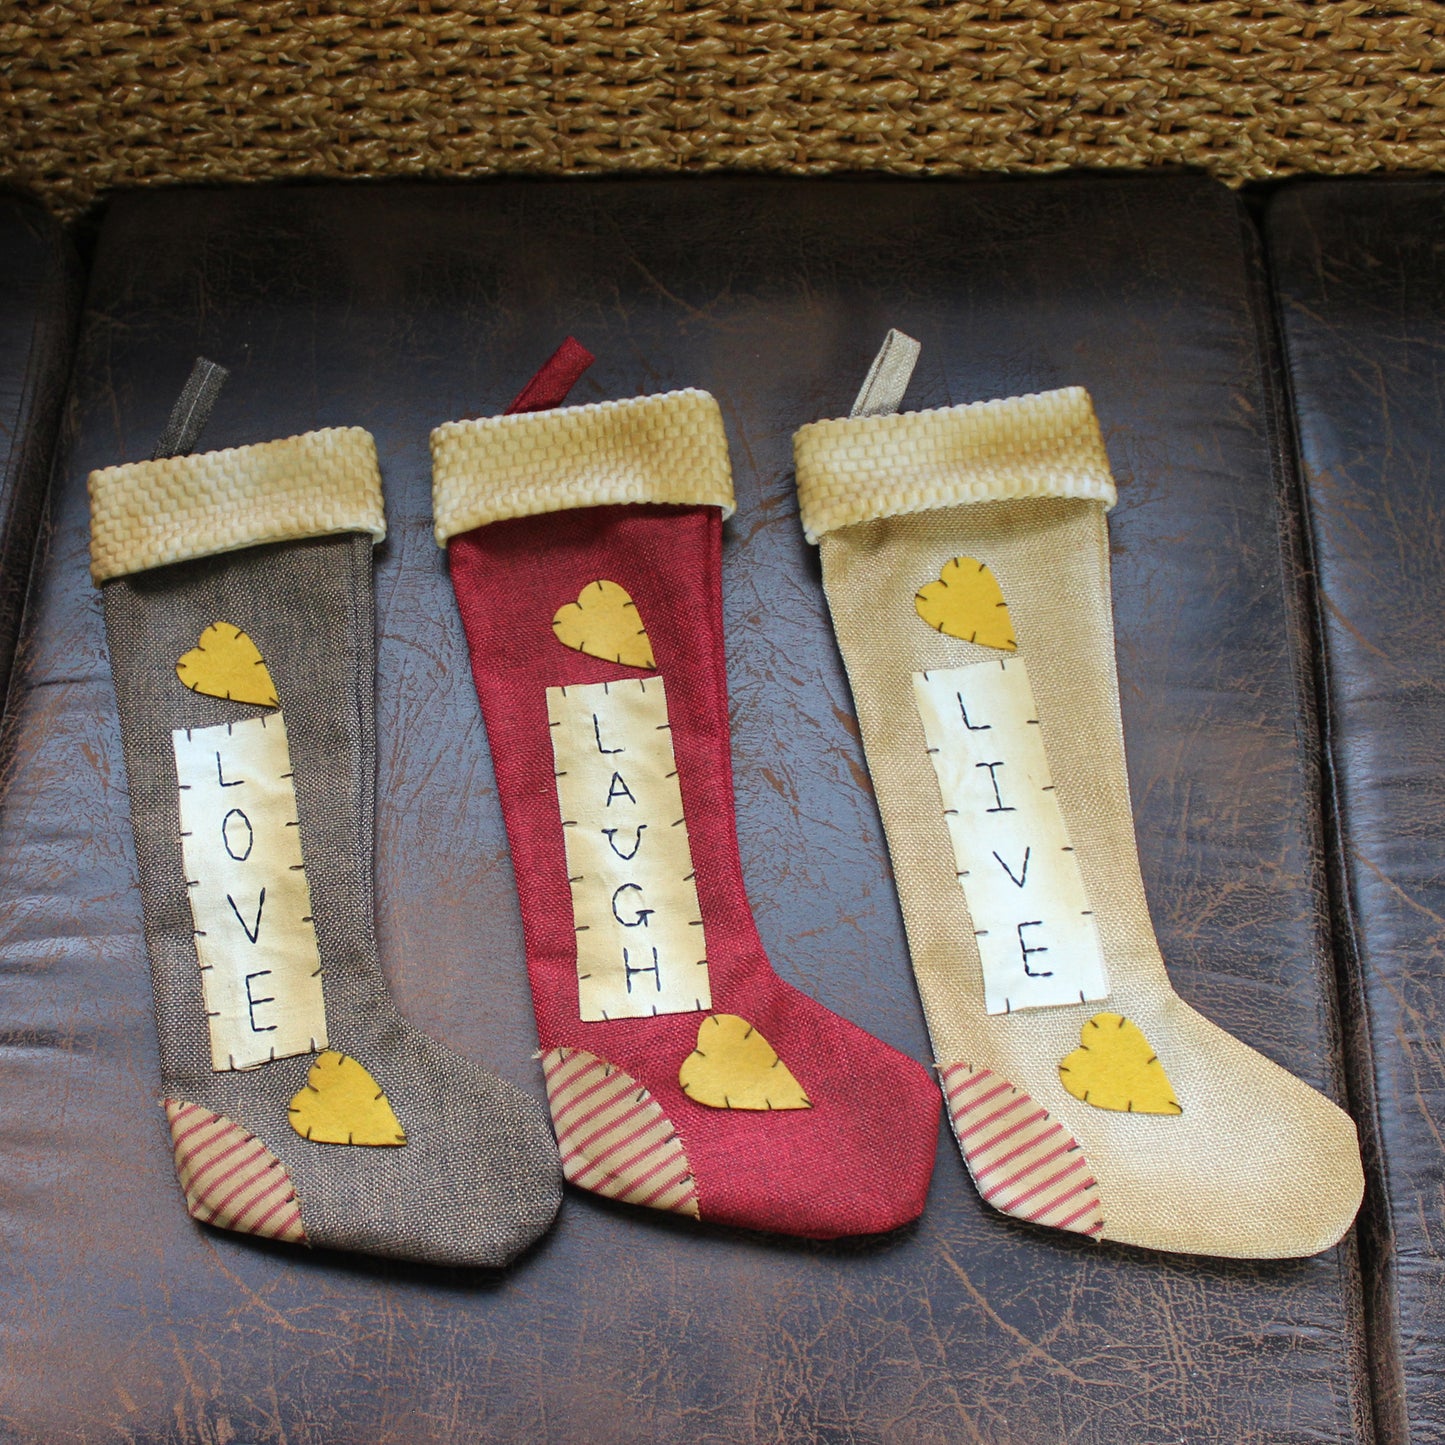 CVHOMEDECO. Primitive Rustic 16 Inch Hanging Stockings with Stitched Messages Live Laugh Love for Christmas or Home Décor. 3 Assorted